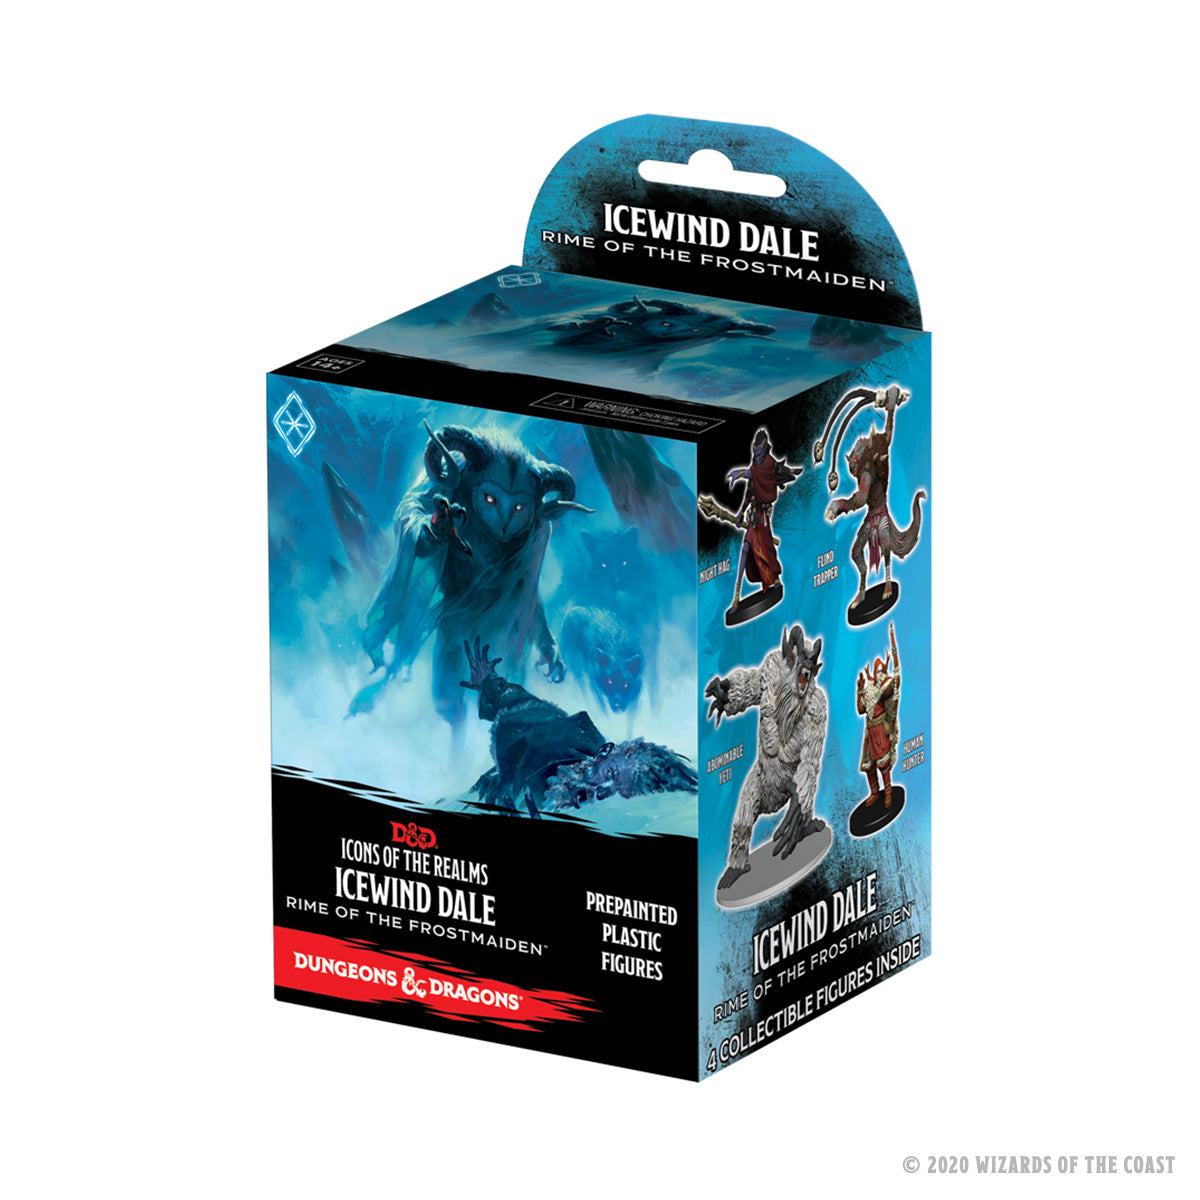 D&D Icons of the Realms: Icewind Dale Rime of the Frostmaiden sealed Product